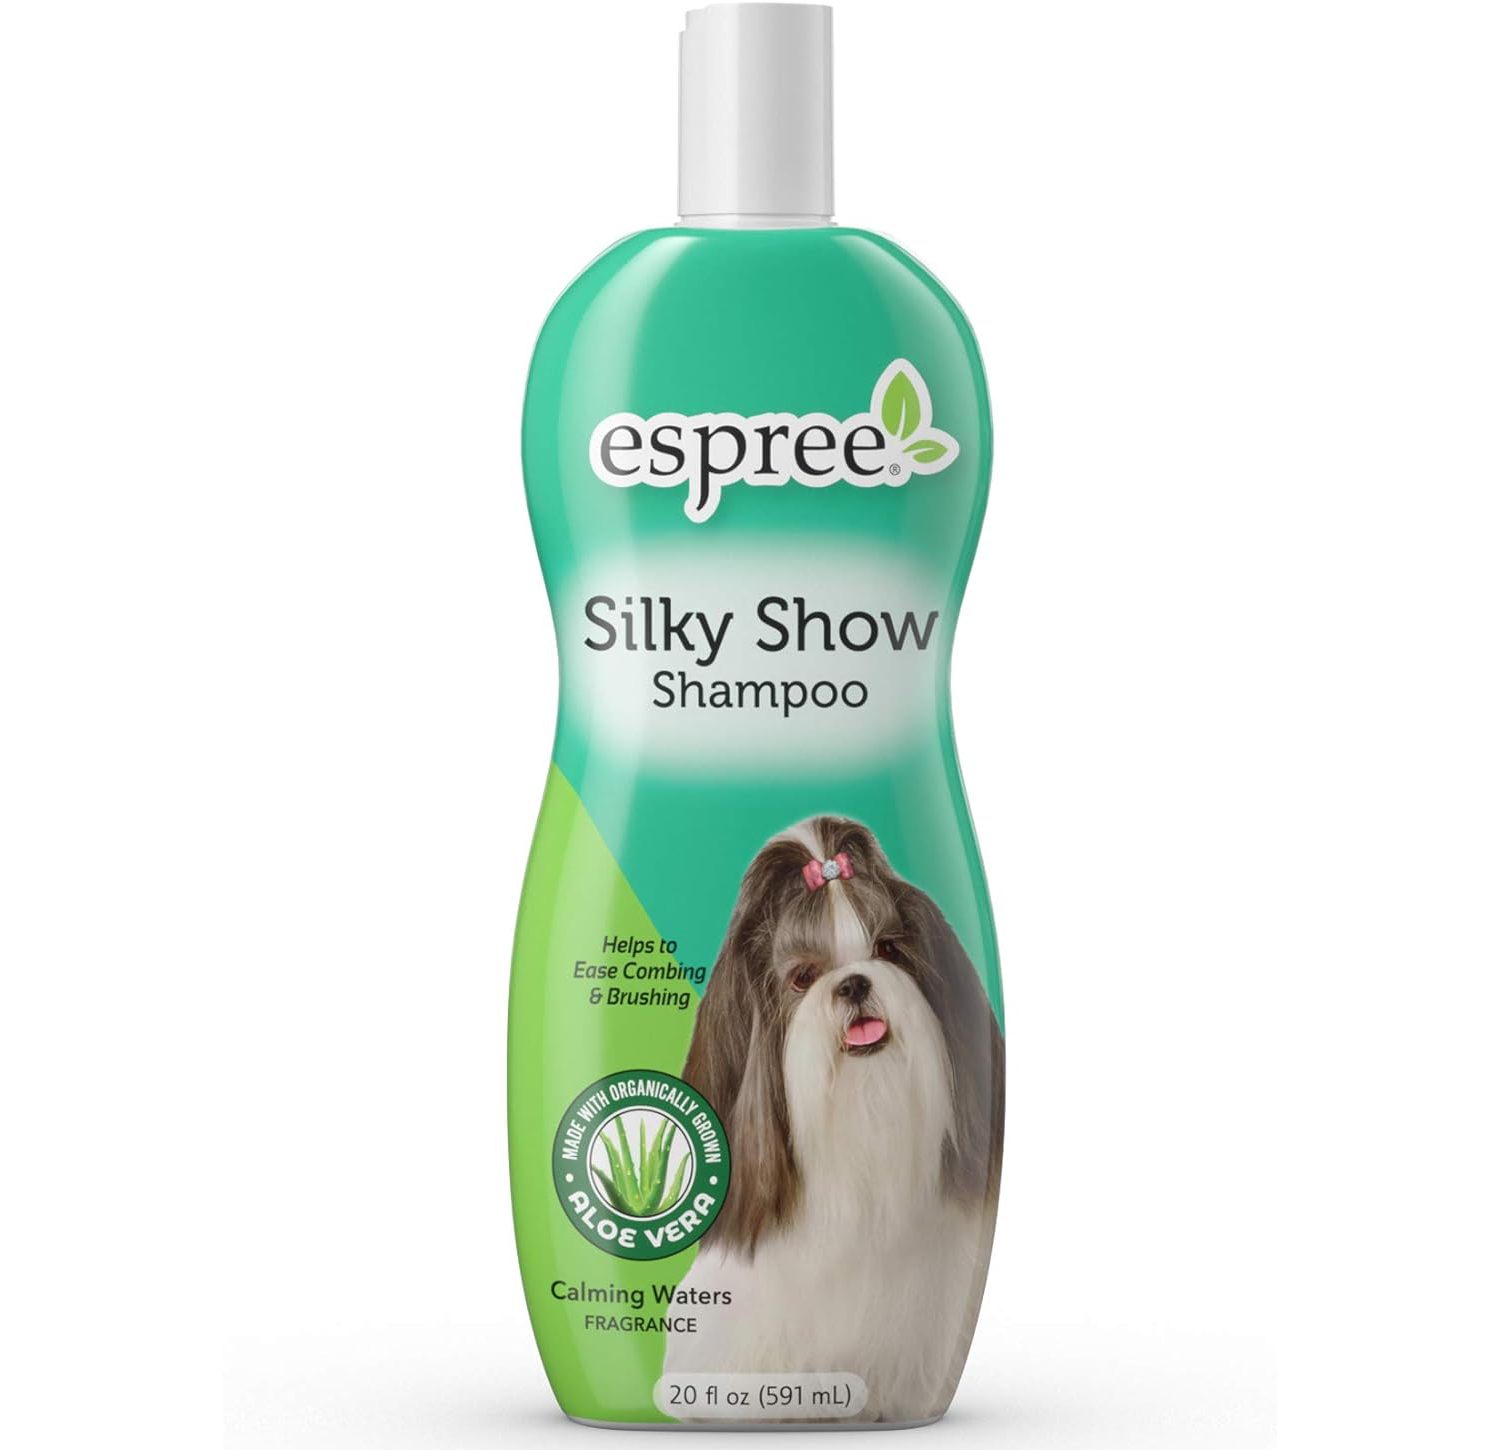 Espree Silky Show Shampoo For Dogs and Cats